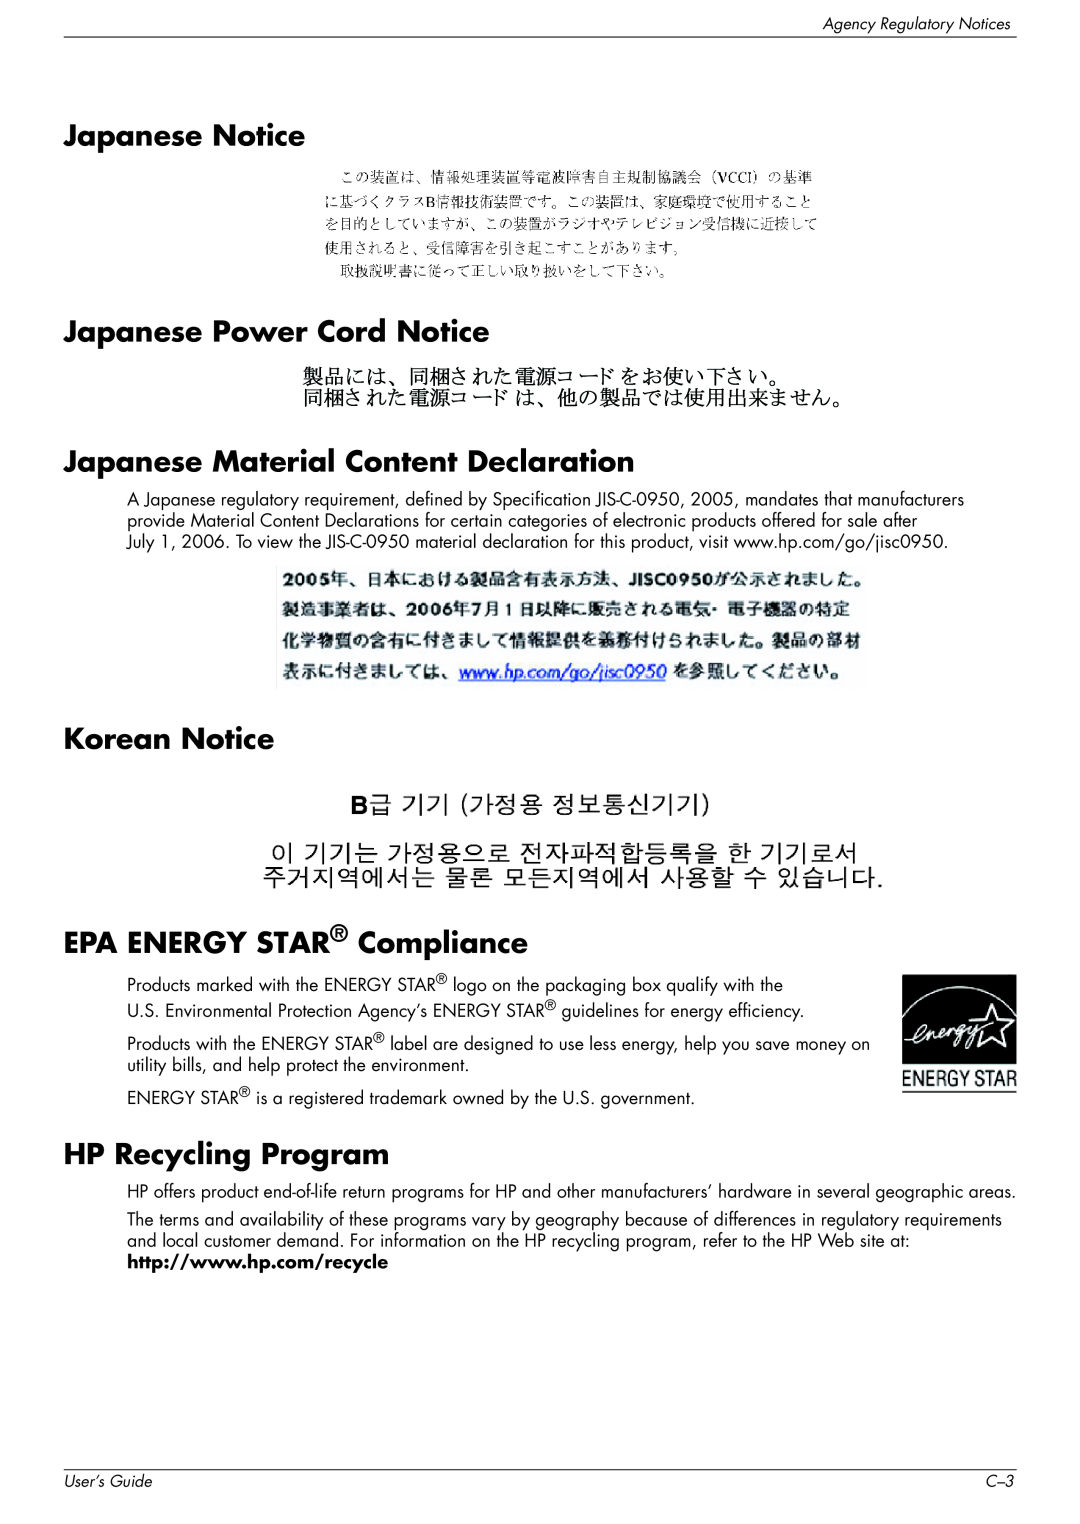 HP W1907, FP1707 Japanese Notice Japanese Power Cord Notice, Japanese Material Content Declaration, HP Recycling Program 